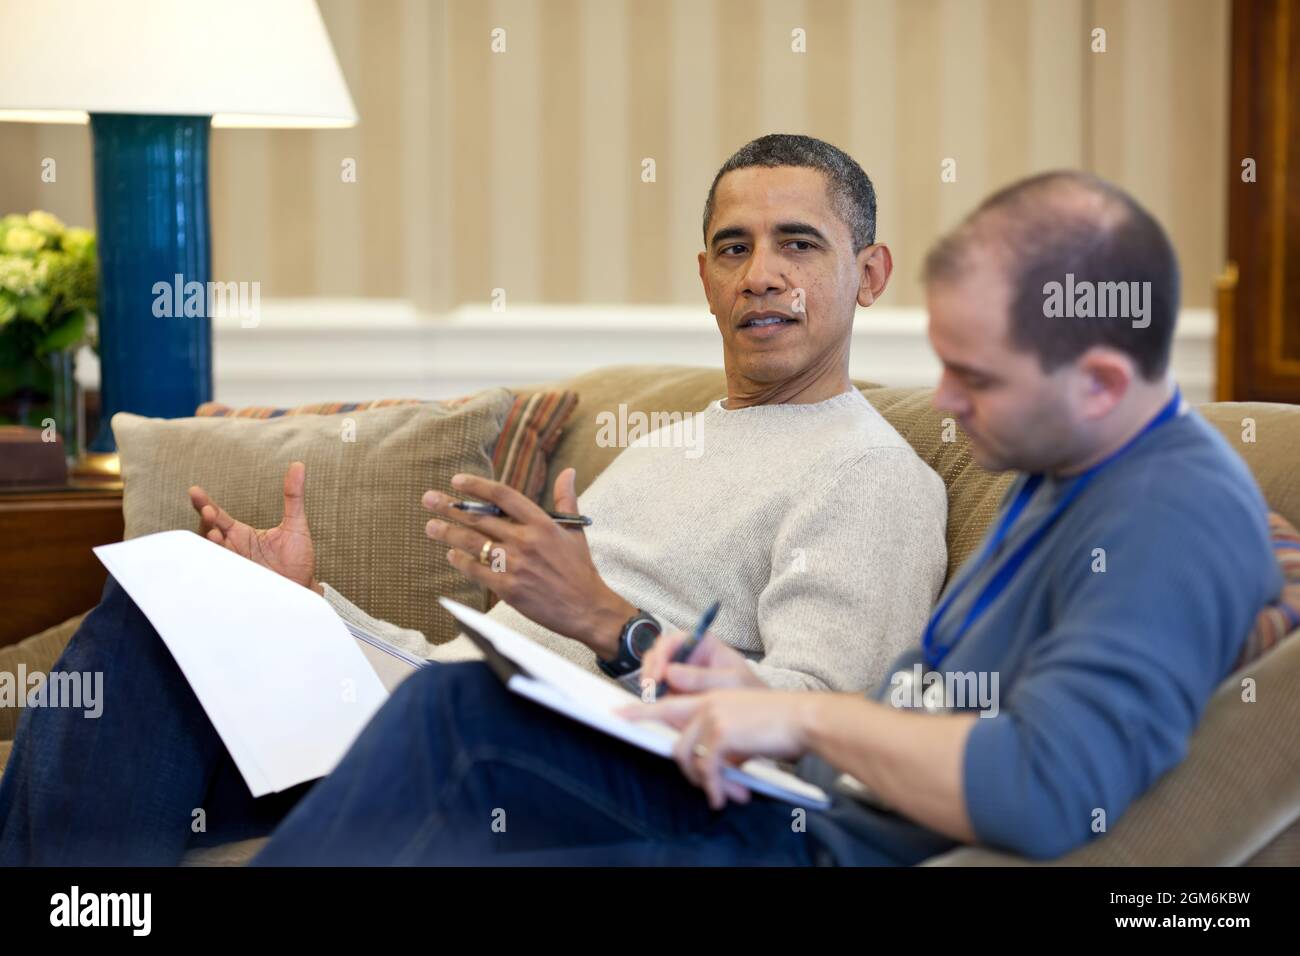 President Barack Obama works on his speech to the American Israel Public Affairs Committee (AIPAC) with Ben Rhodes, Deputy National Security Advisor for Strategic Communications, in the Oval Office, Saturday, March, 3, 2012. (Official White House Photo by Pete Souza) This official White House photograph is being made available only for publication by news organizations and/or for personal use printing by the subject(s) of the photograph. The photograph may not be manipulated in any way and may not be used in commercial or political materials, advertisements, emails, products, promotions that i Stock Photo